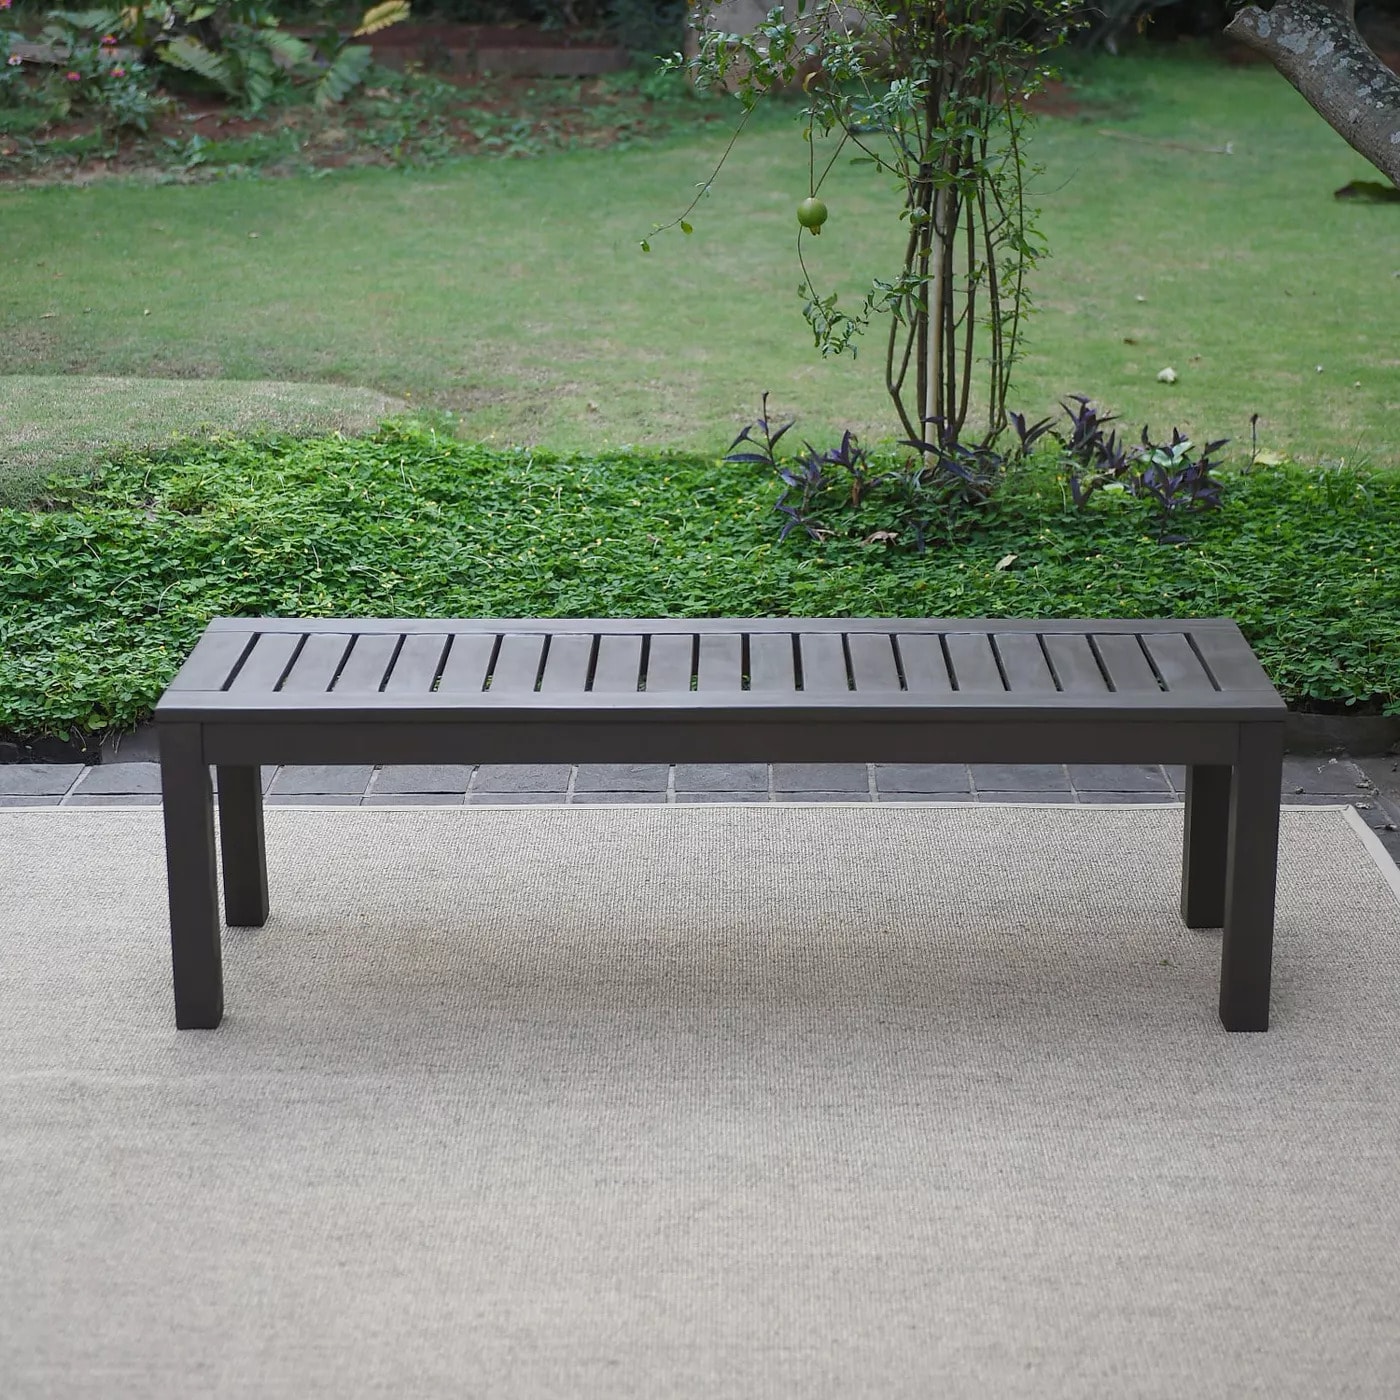 Dark x Casual W department 55-in Cambridge Benches Bench the H Braga Gray at in 17-in Patio Dining